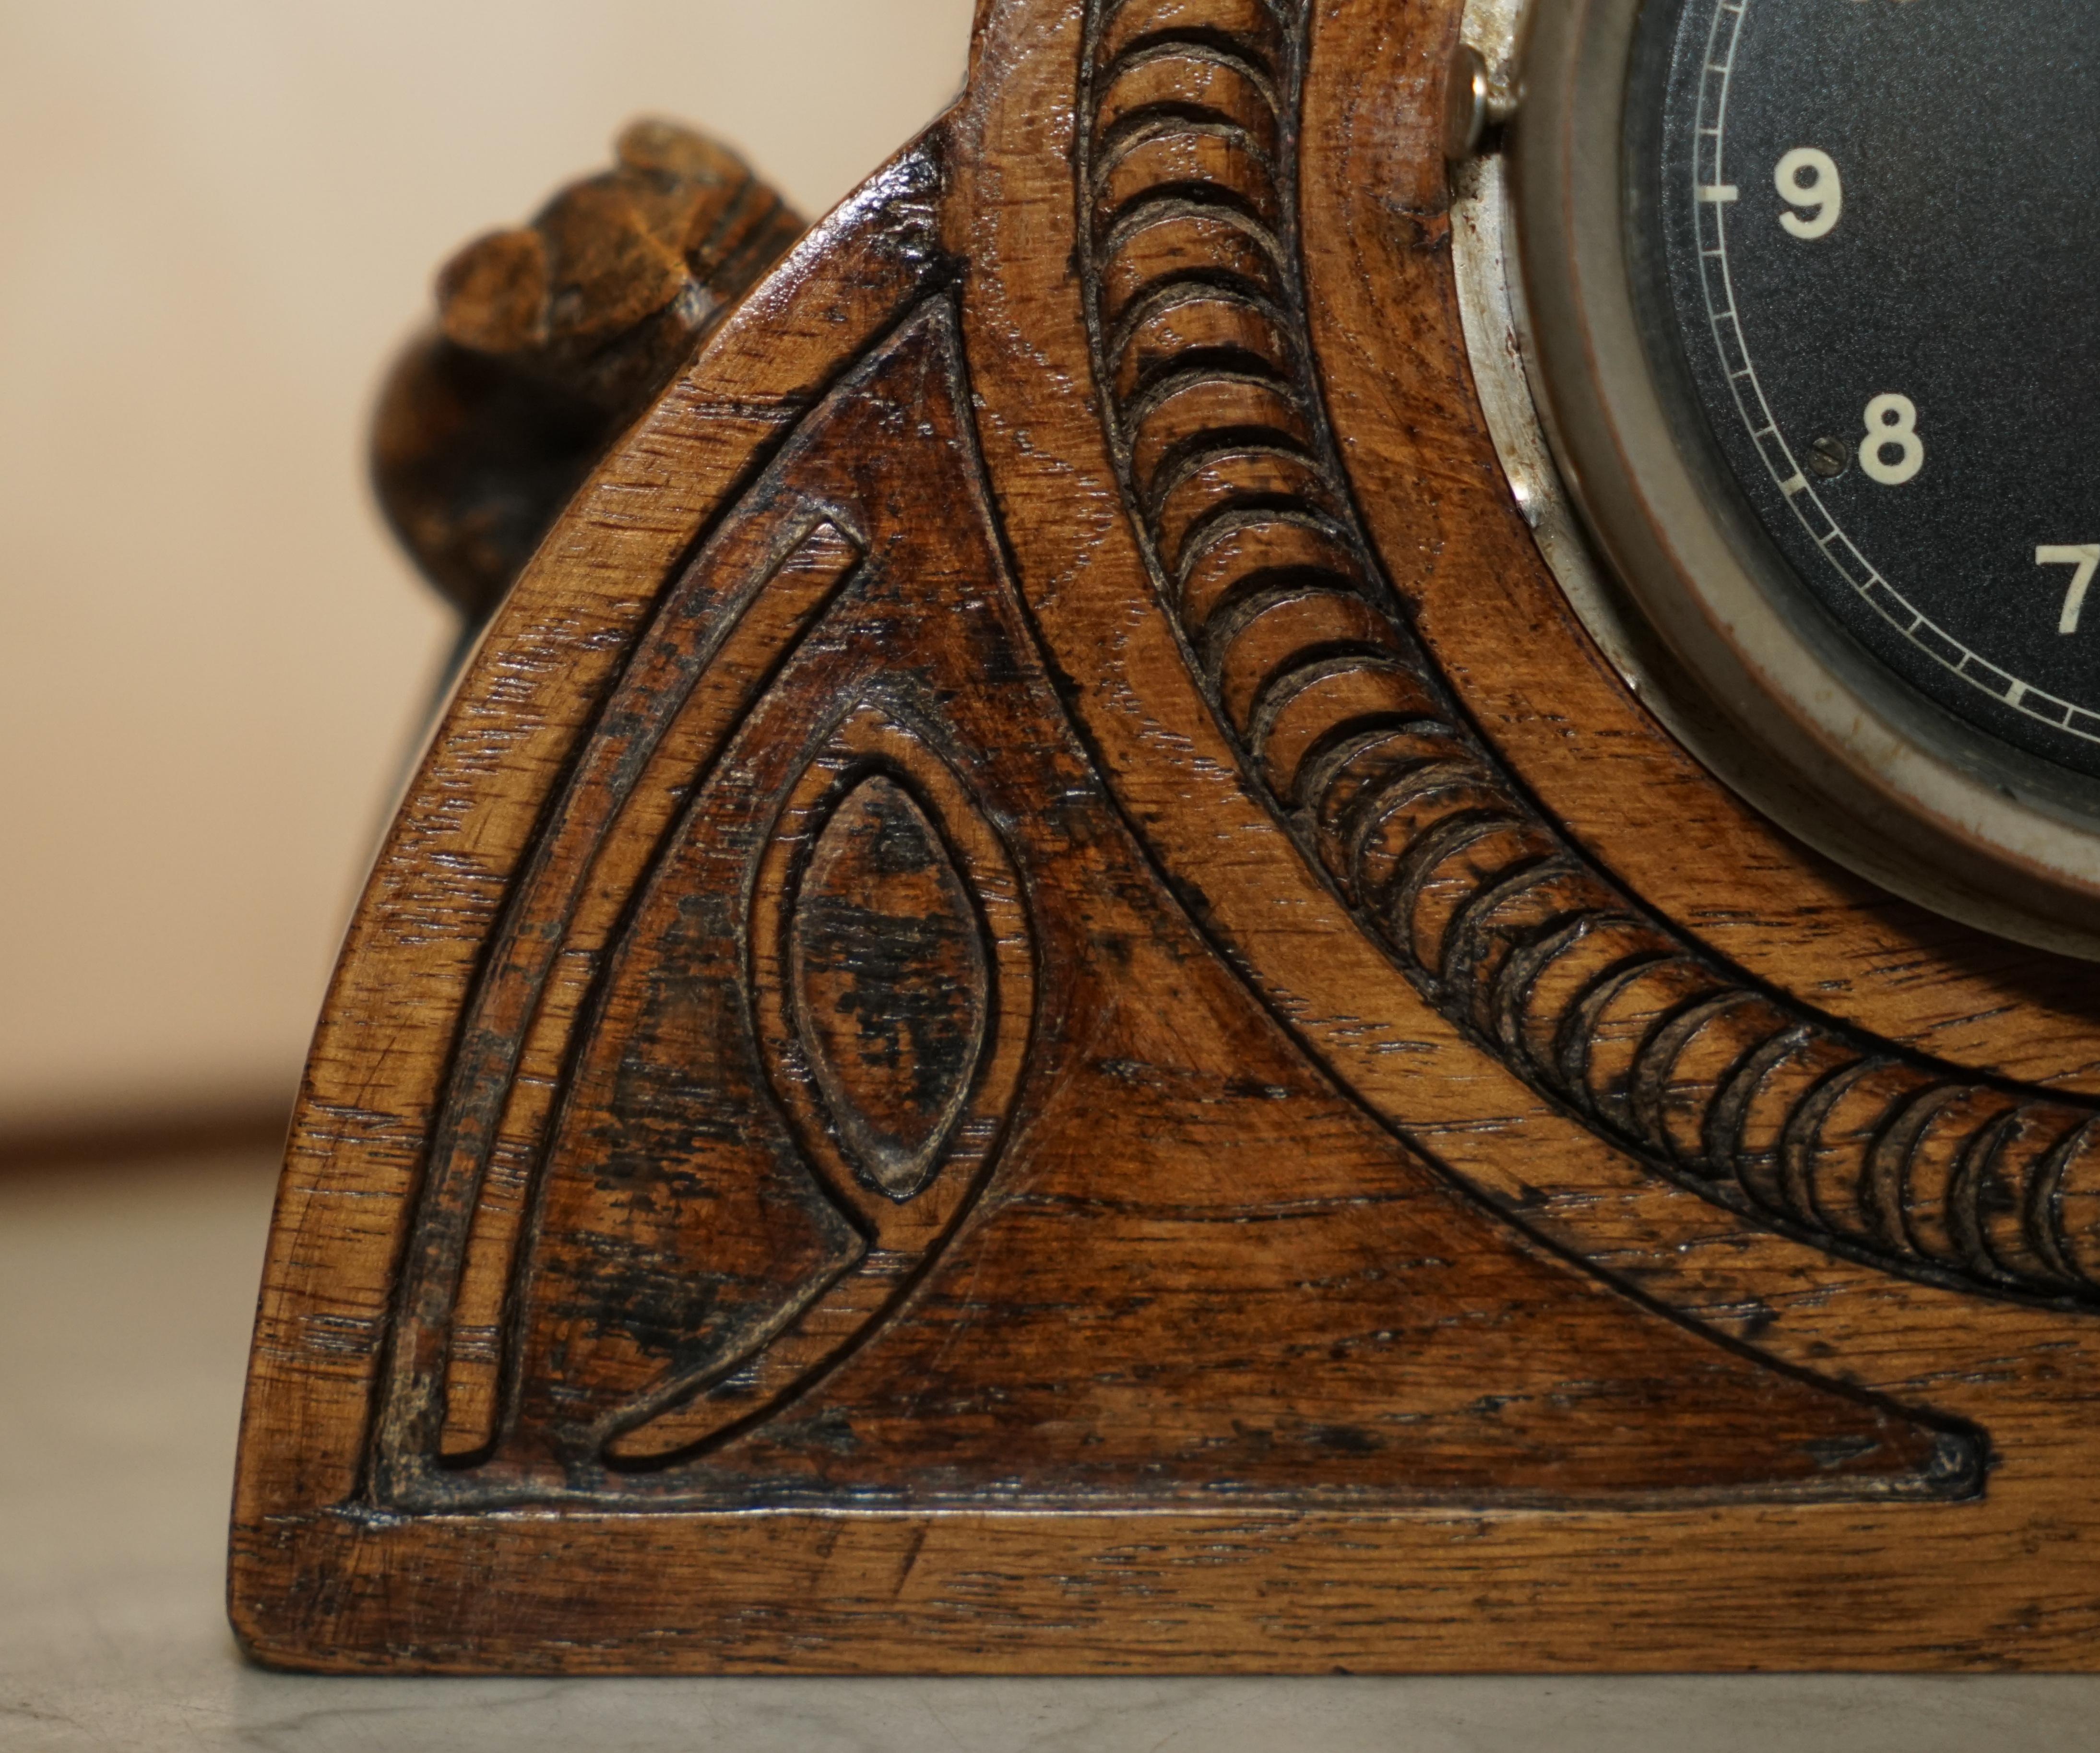 Art Deco Super Rare 1939 Dated and Carved Robert Mouseman Thompson Smiths Mantle Clock